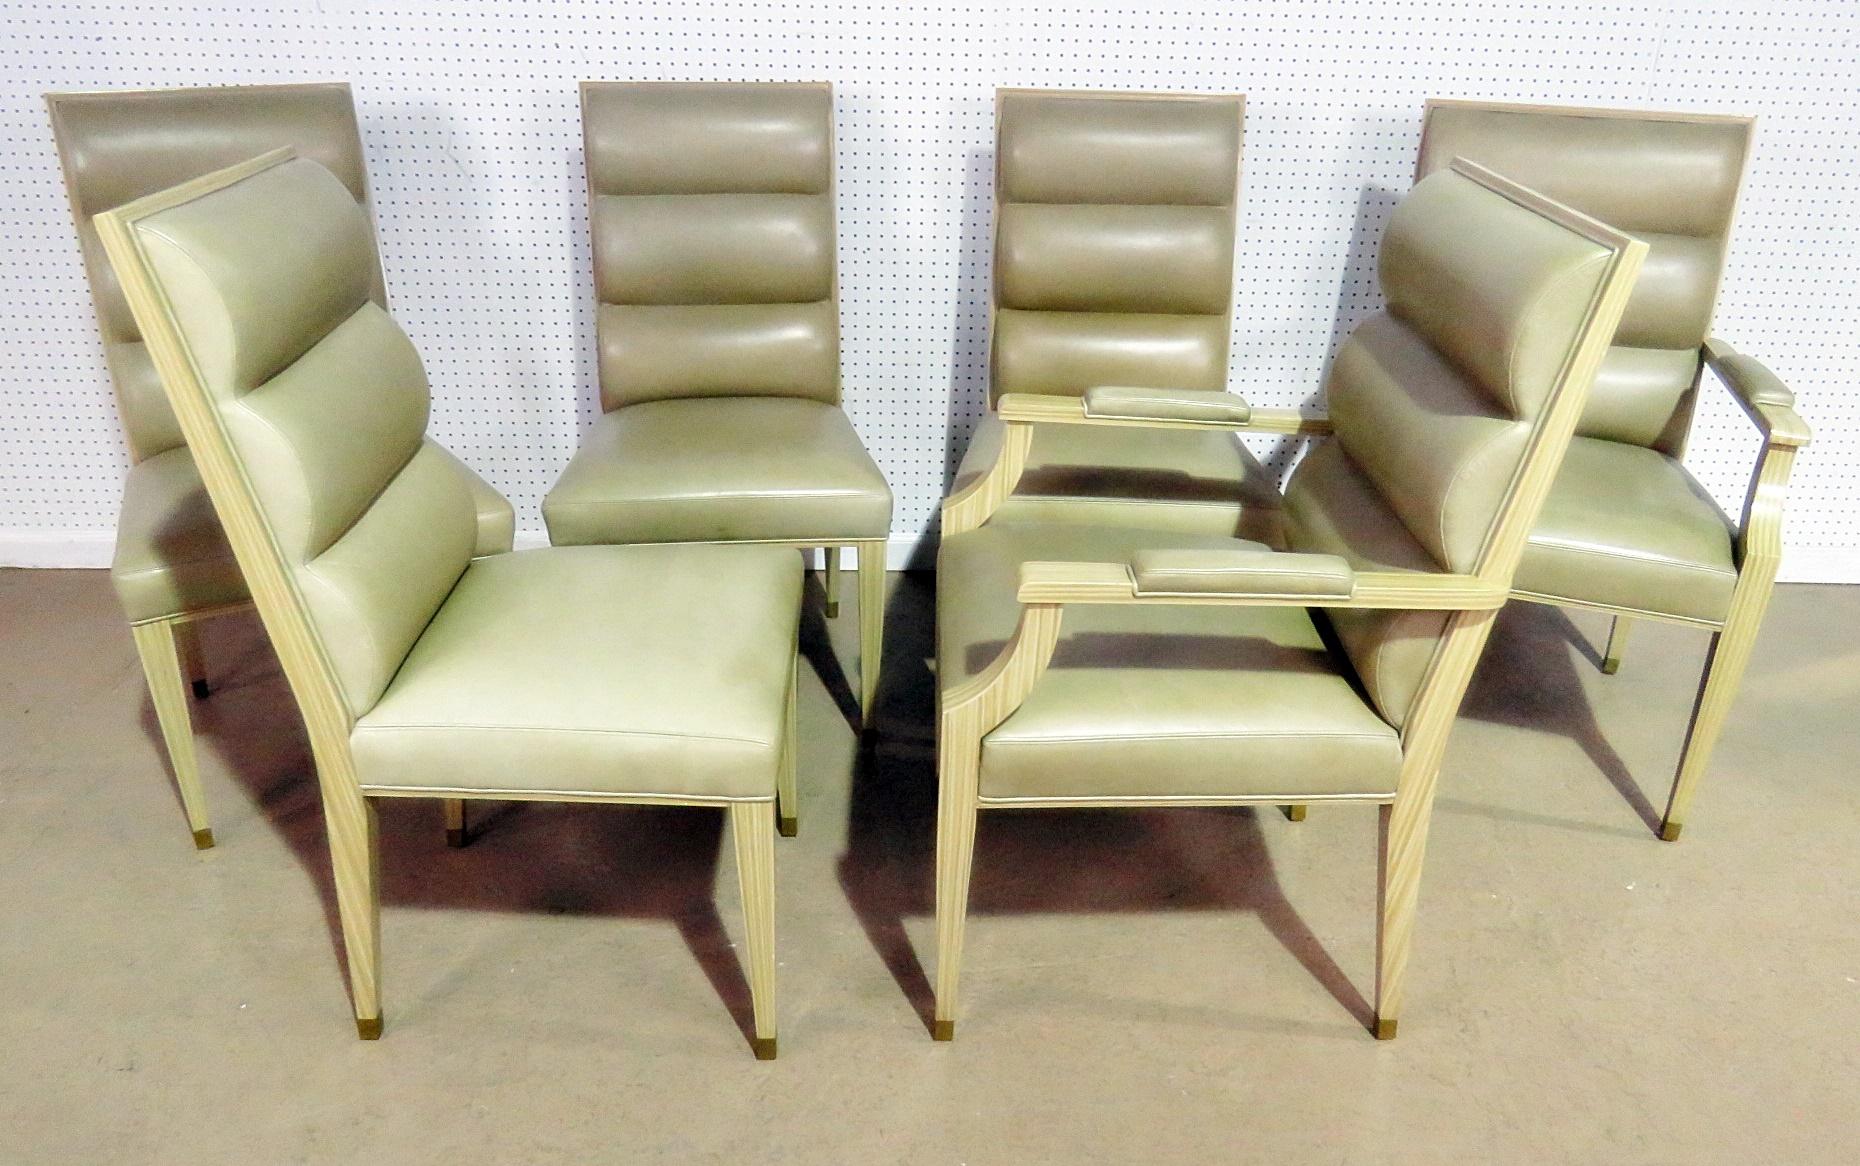 Set of Six Mid-Century Modern Dining Chairs 1